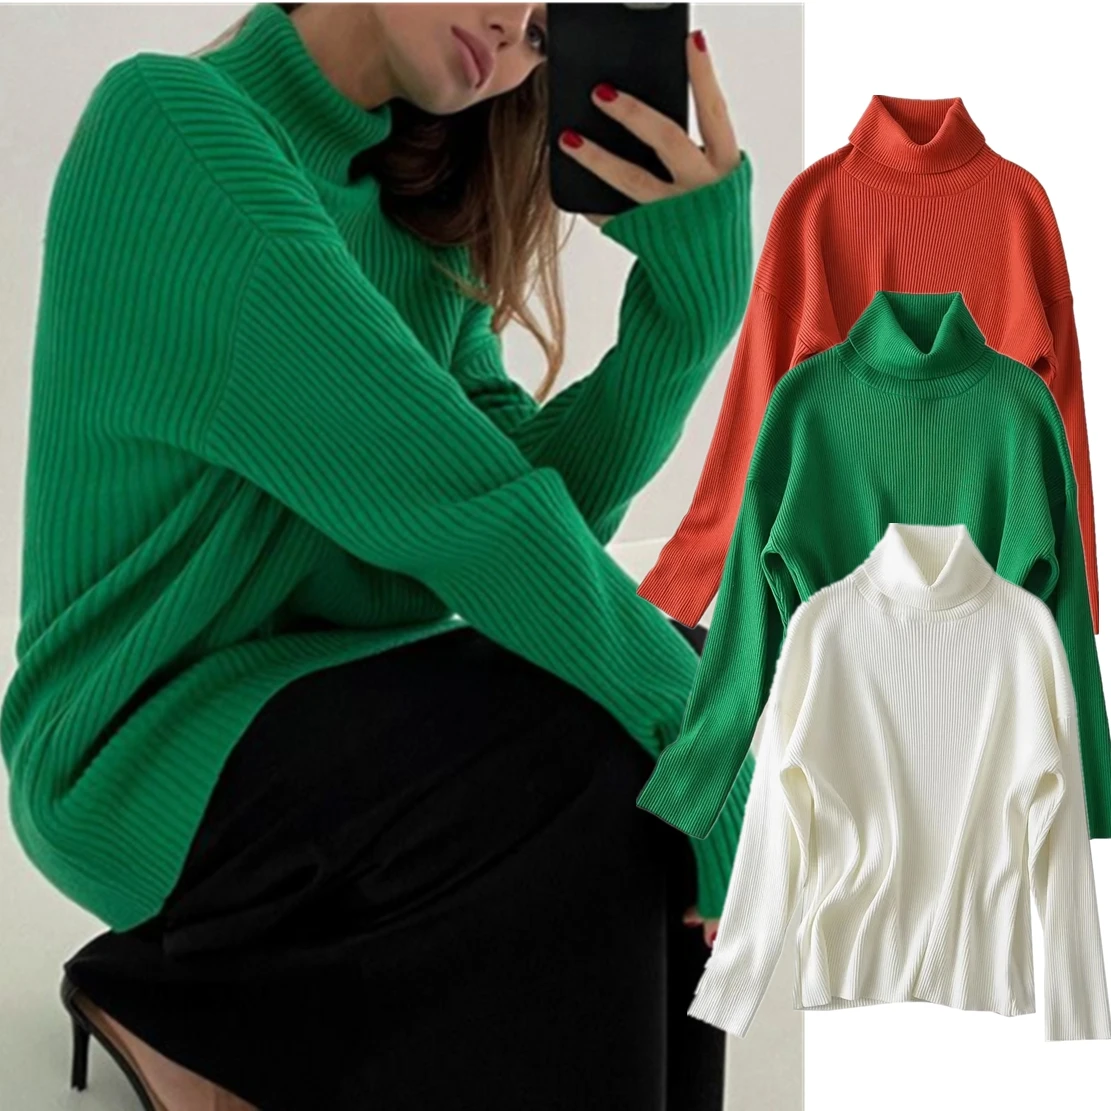 

Jenny&Dave 2023 Ins Fashion Blogger Vintage Turtleneck Solid Loose Knitwear Rib Winter Sweaters Women Pullovers Tops